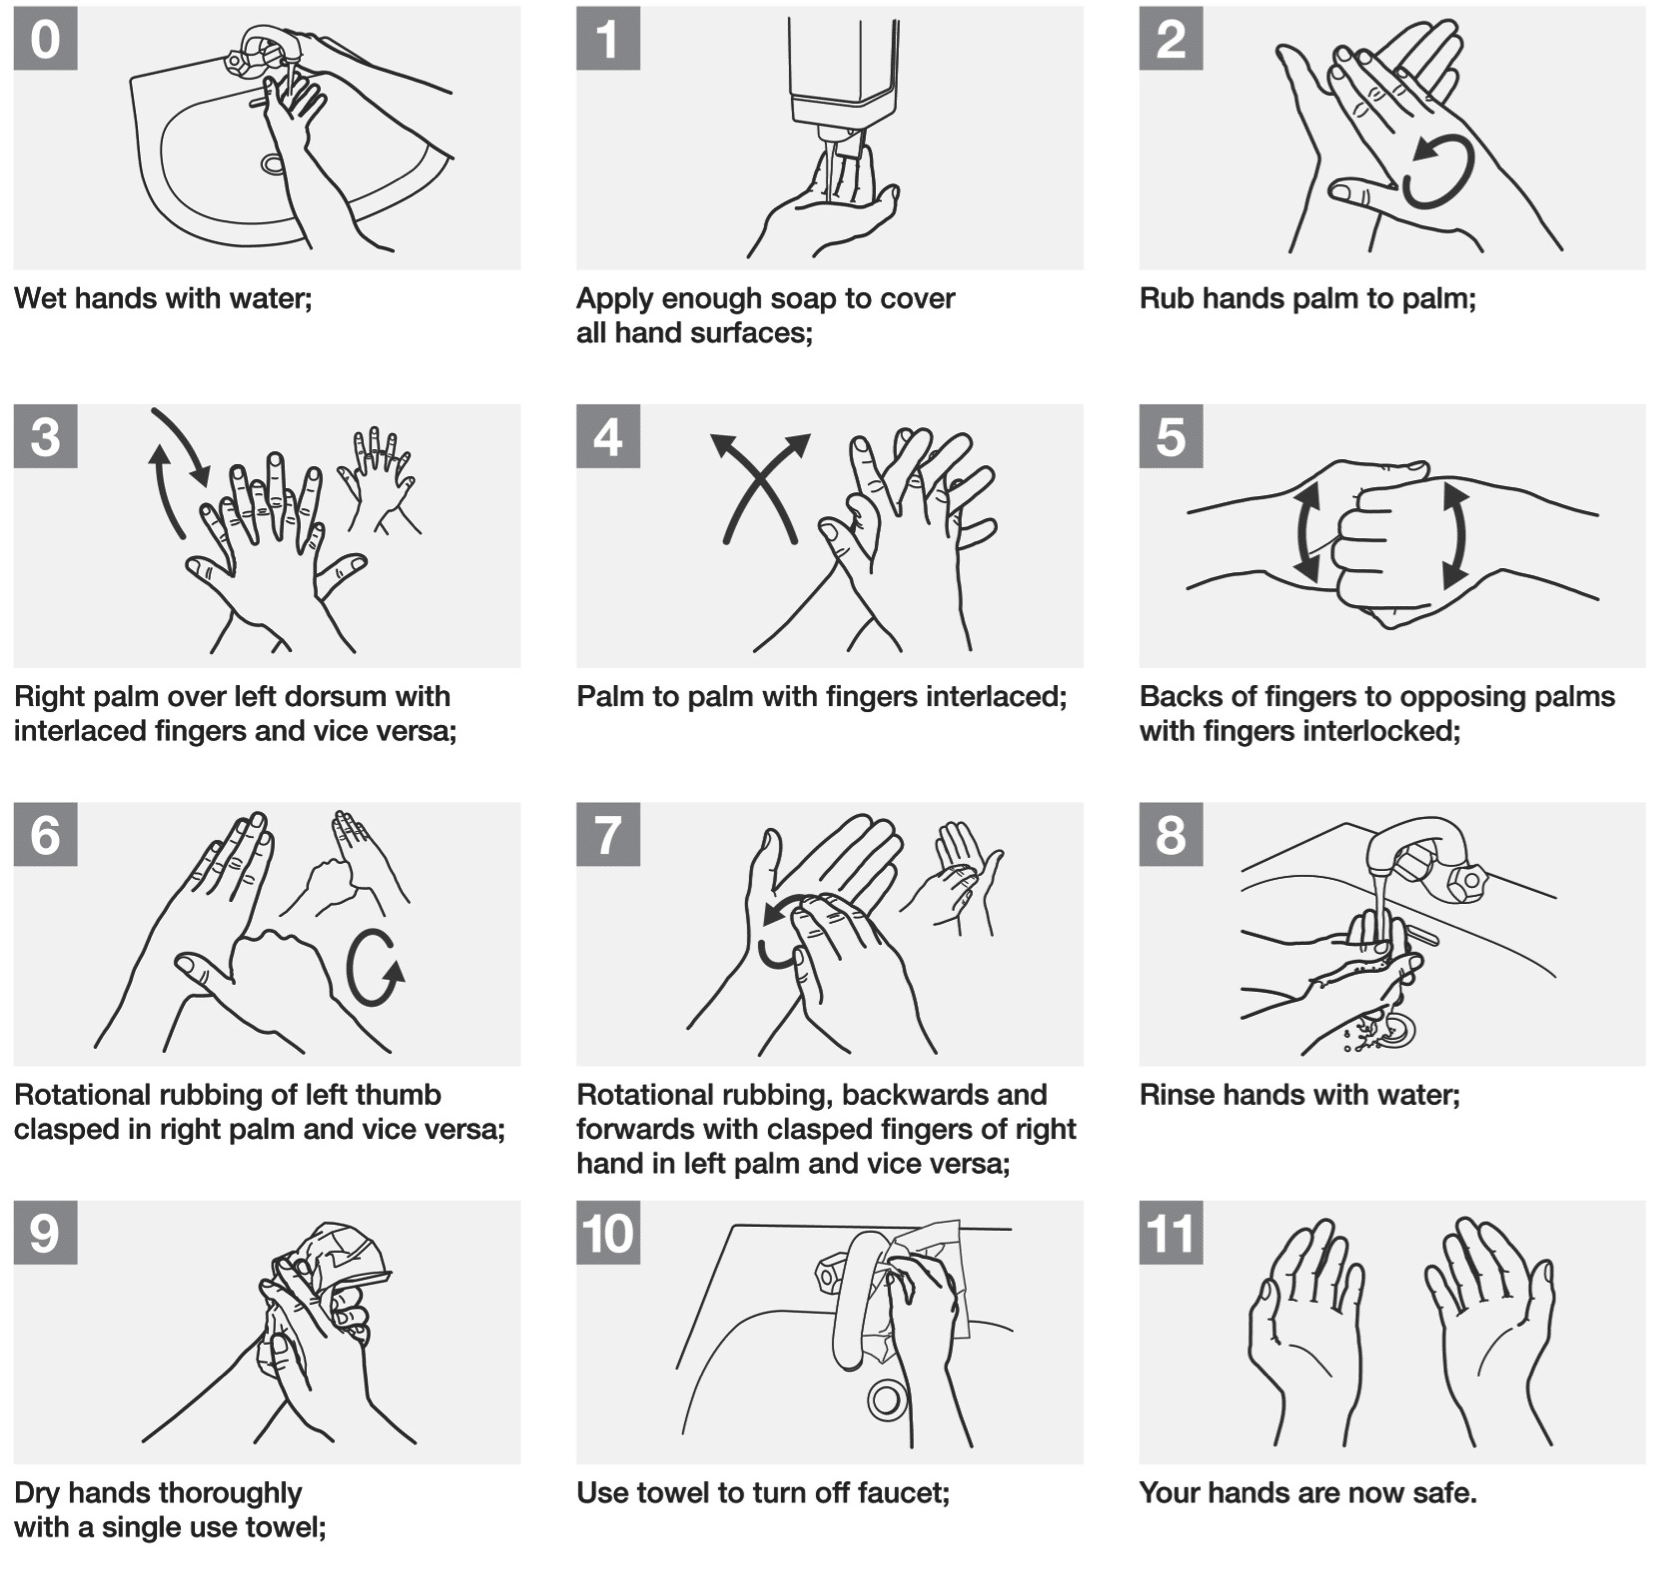 Fig 1 - Guide to handwashing. Adapted from the WHO "How to Handwash" poster.